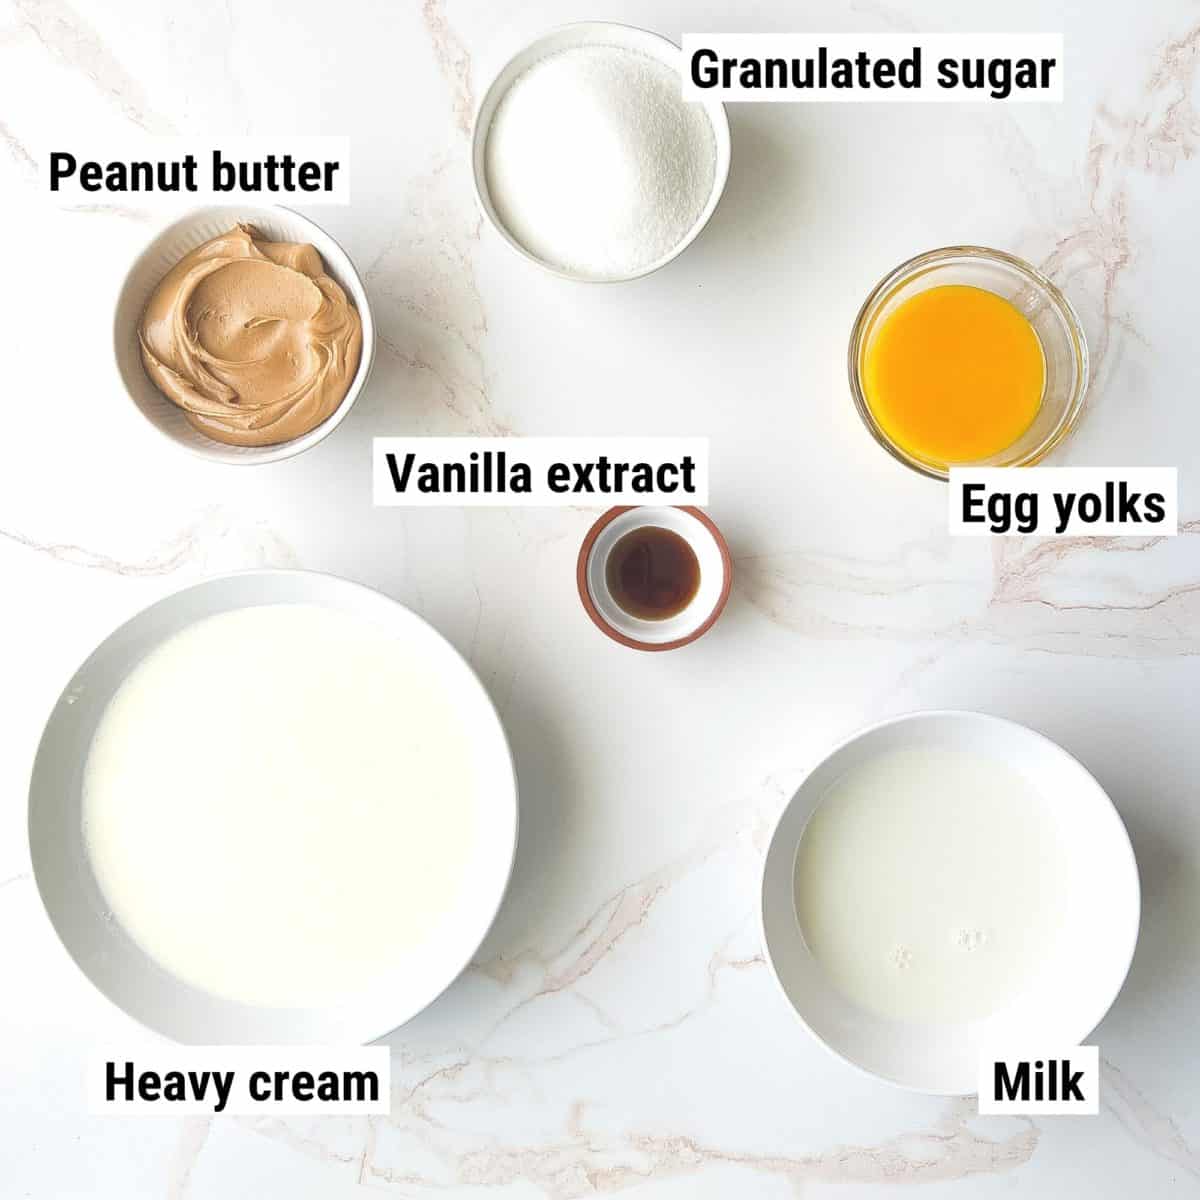 The recipe ingredients used to make peanut butter ice cream spread out on a table.